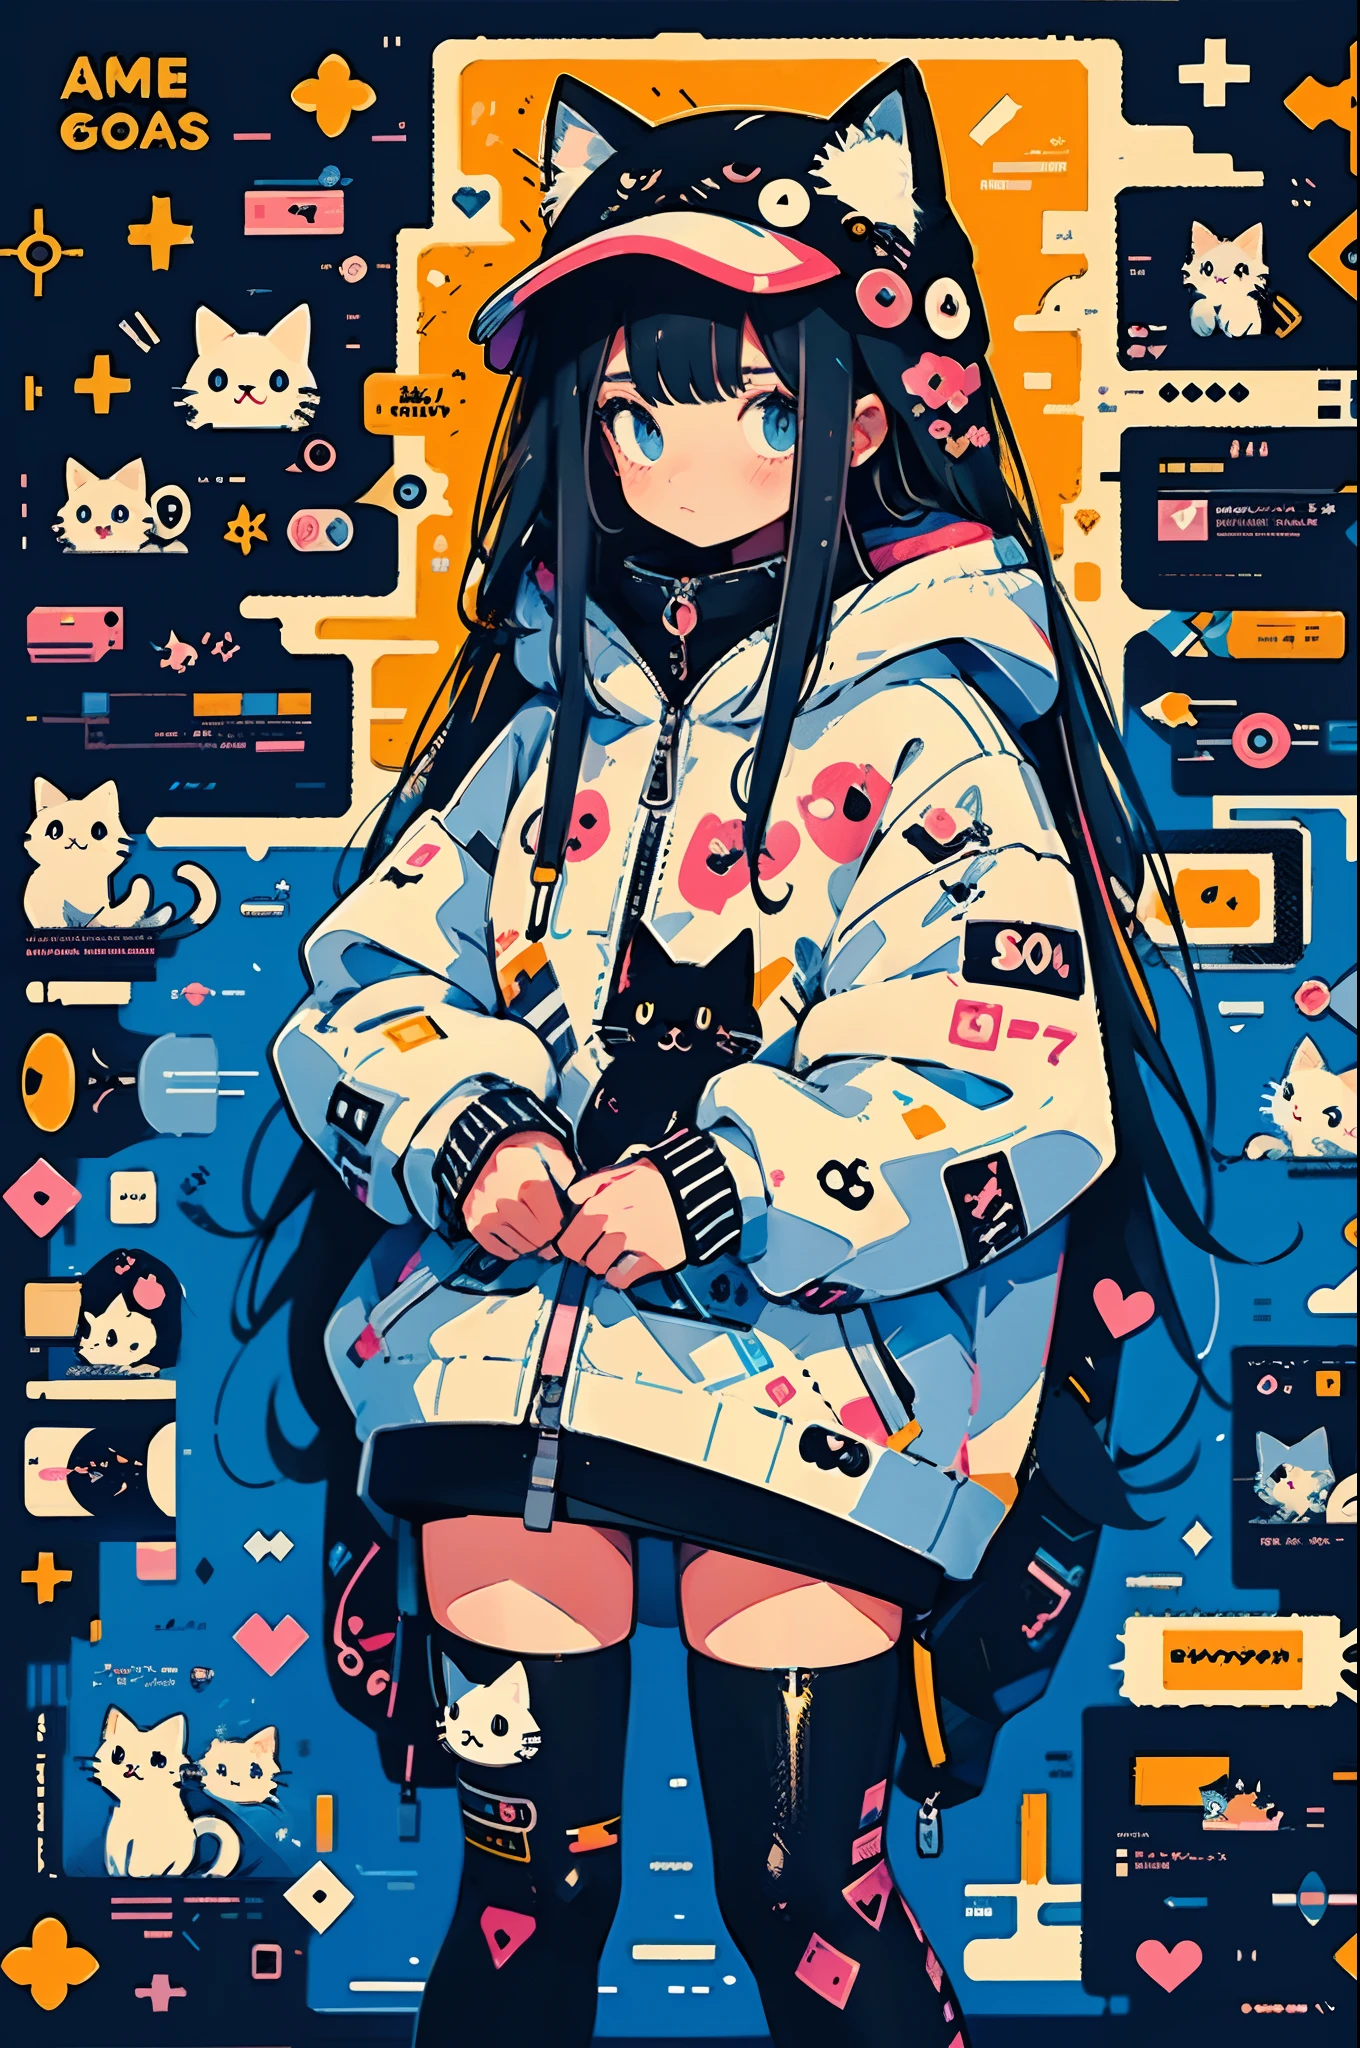 anime girl with black hair and a cat hat, anime style illustration, moe artstyle, wallpaper 8 k, digital illustration, beautiful catgirl, she wears a hoodie with animal ears and technowear technology, futuristic fashion in black and holographic colors, many details and buttons on it, cables coming out of the sleeves, the background is that of a simple pattern with cat motifs and paws, purple and black, black cat eyes, holographic, holo details